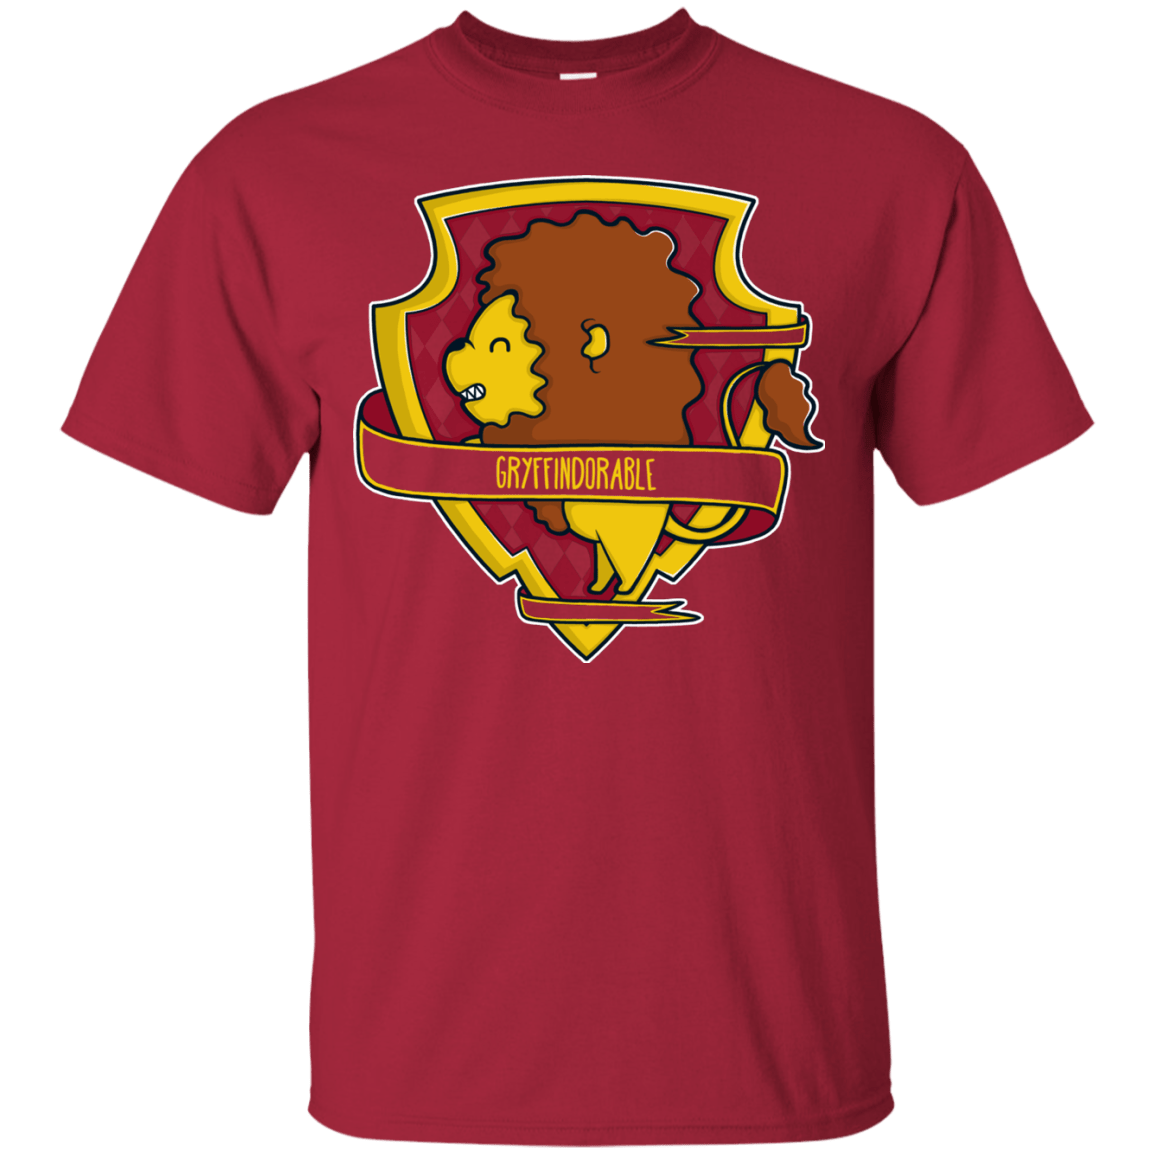 T-Shirts Cardinal / Small Gryffindorable T-Shirt